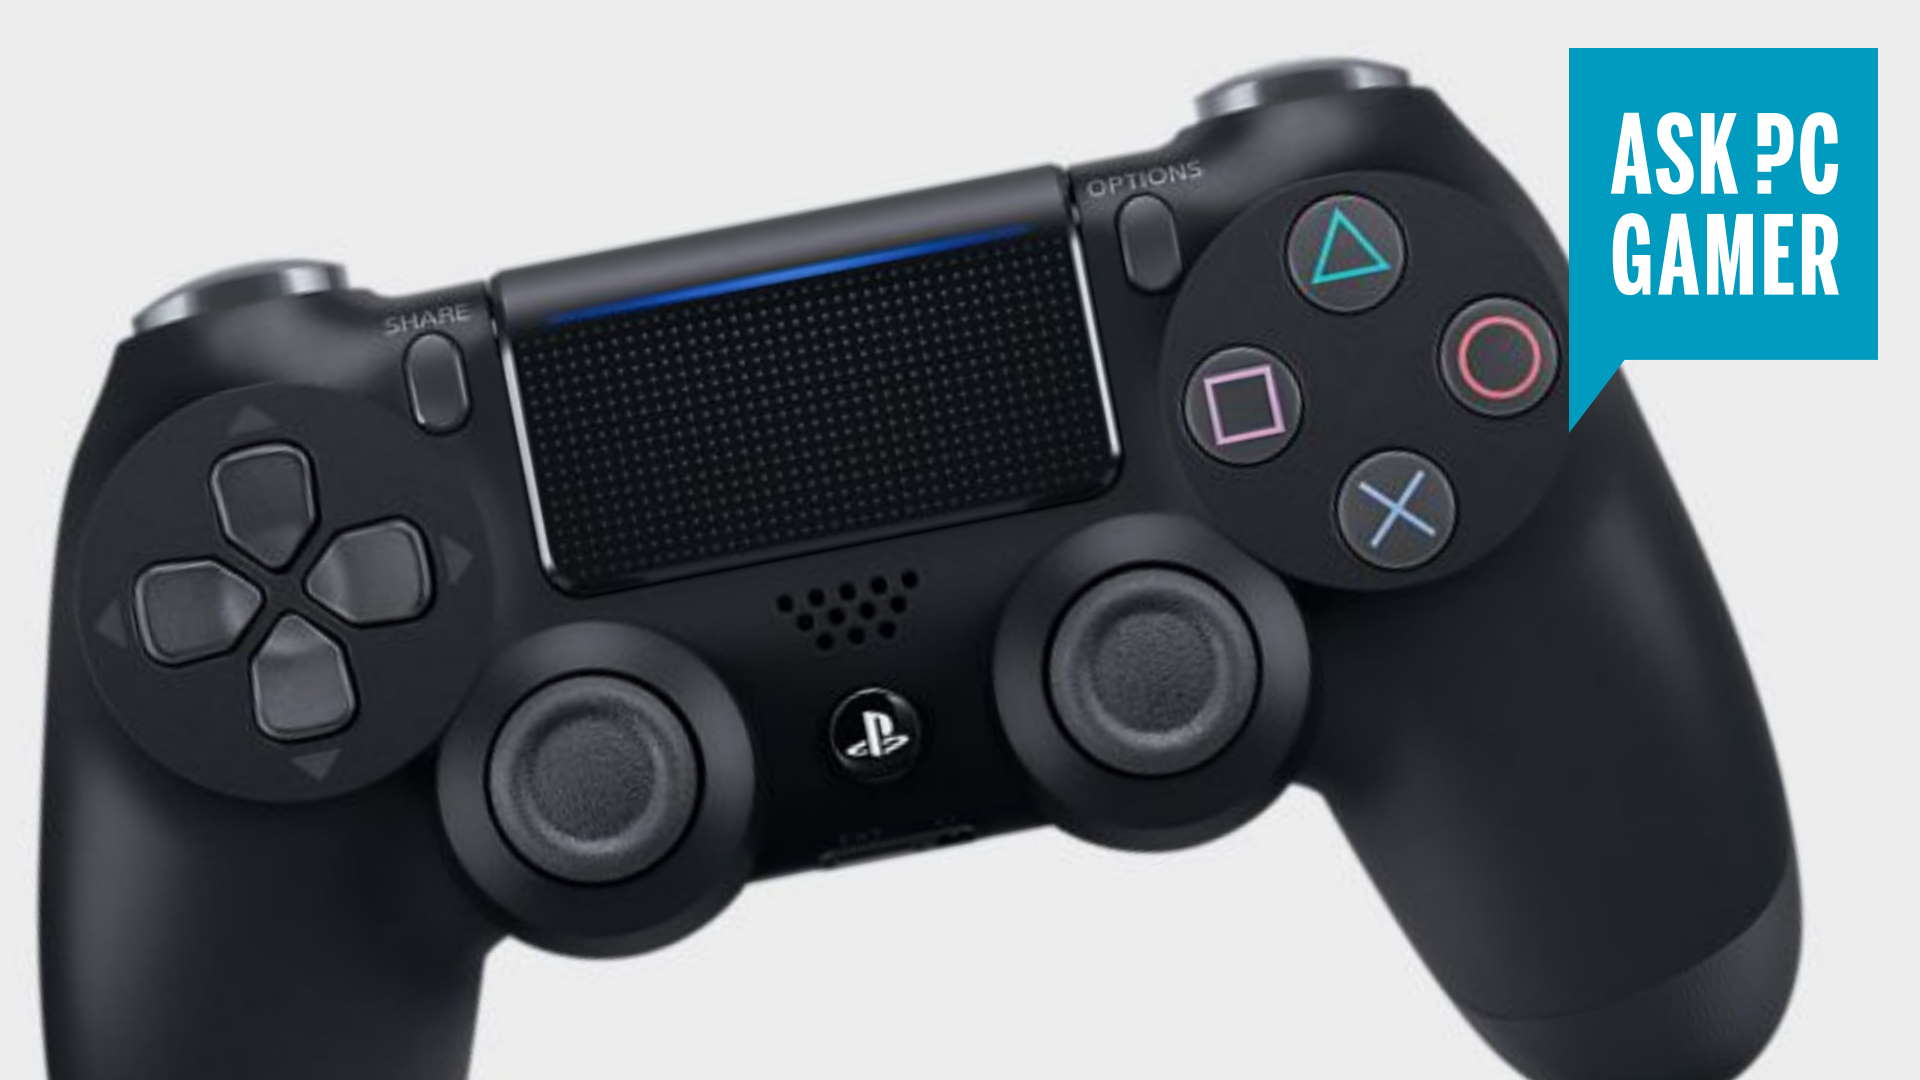 simultaneous grammar Scrutinize How to use a PS4 controller on PC: | PC Gamer